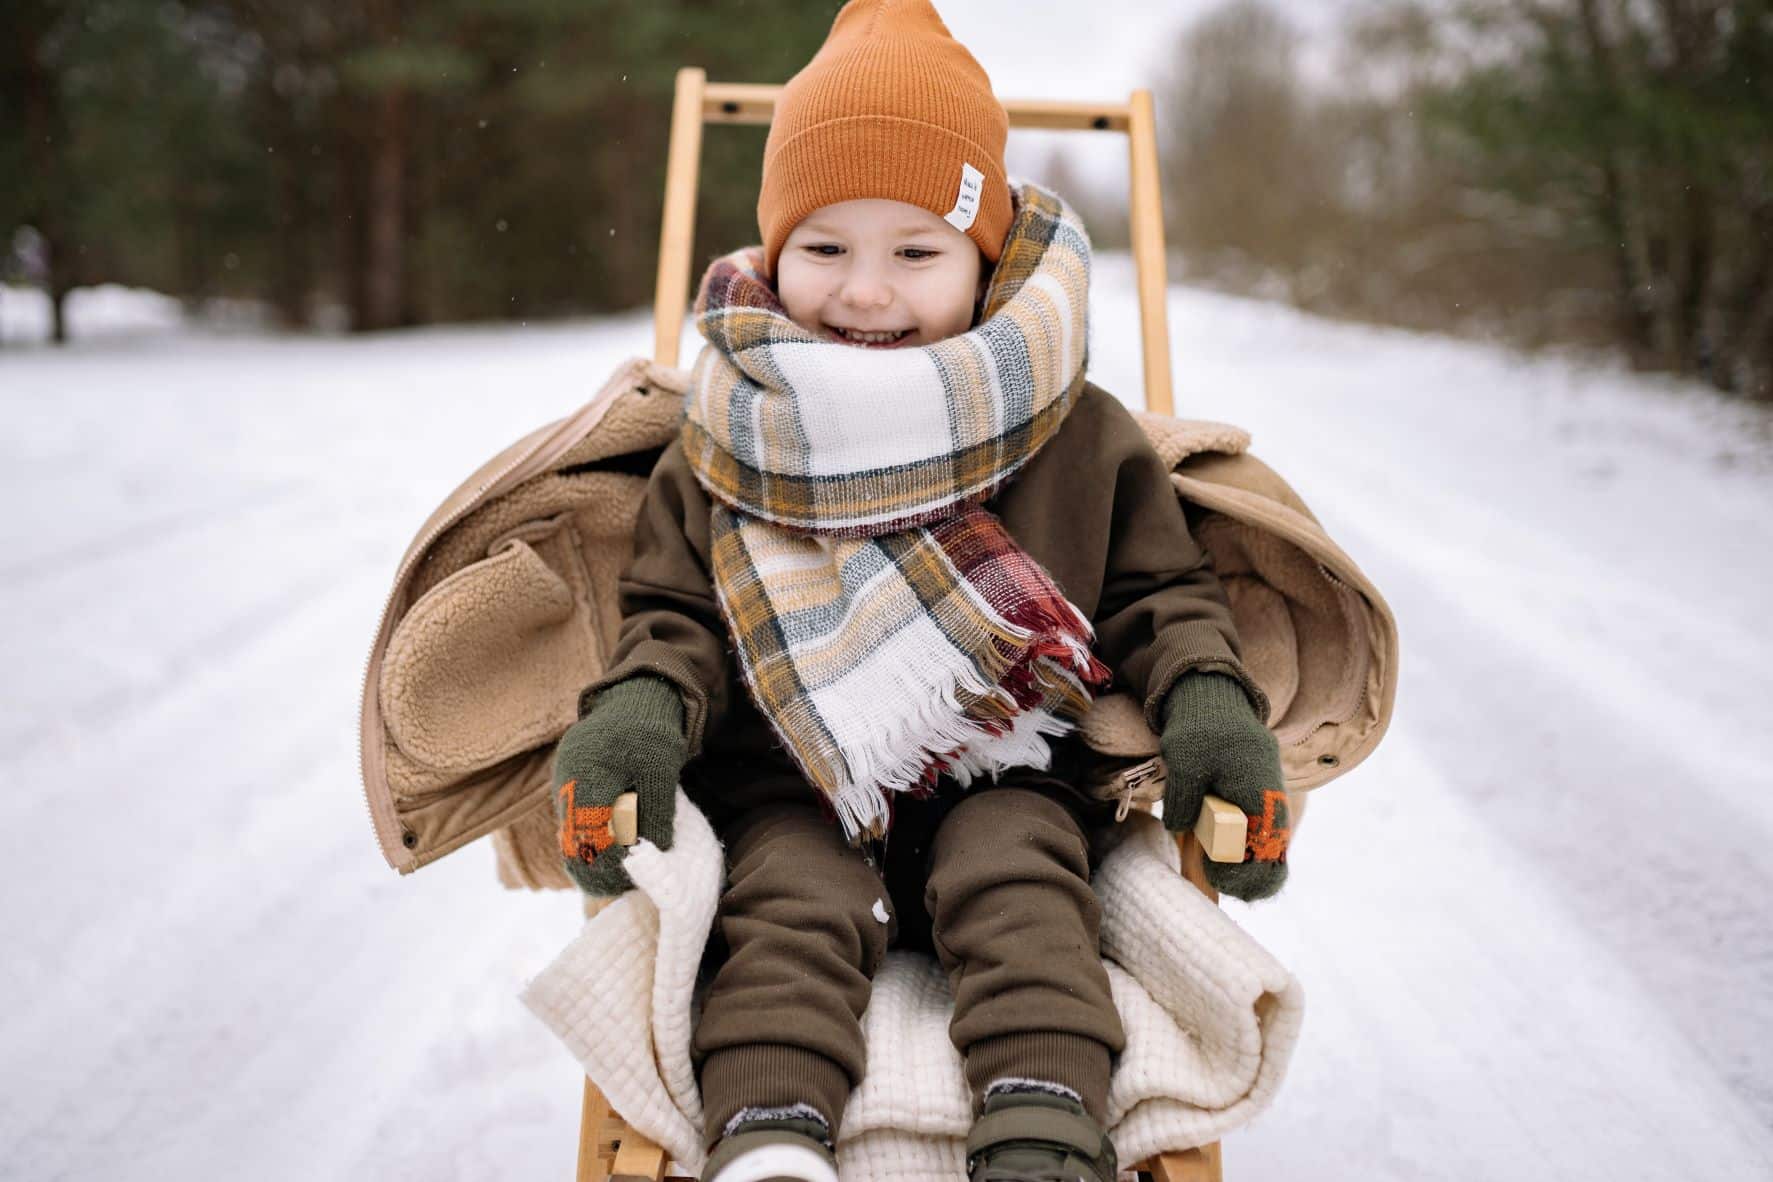 Warm and Playful: A Comprehensive Guide to Kids' Gloves and Mittens for Cozy Adventures